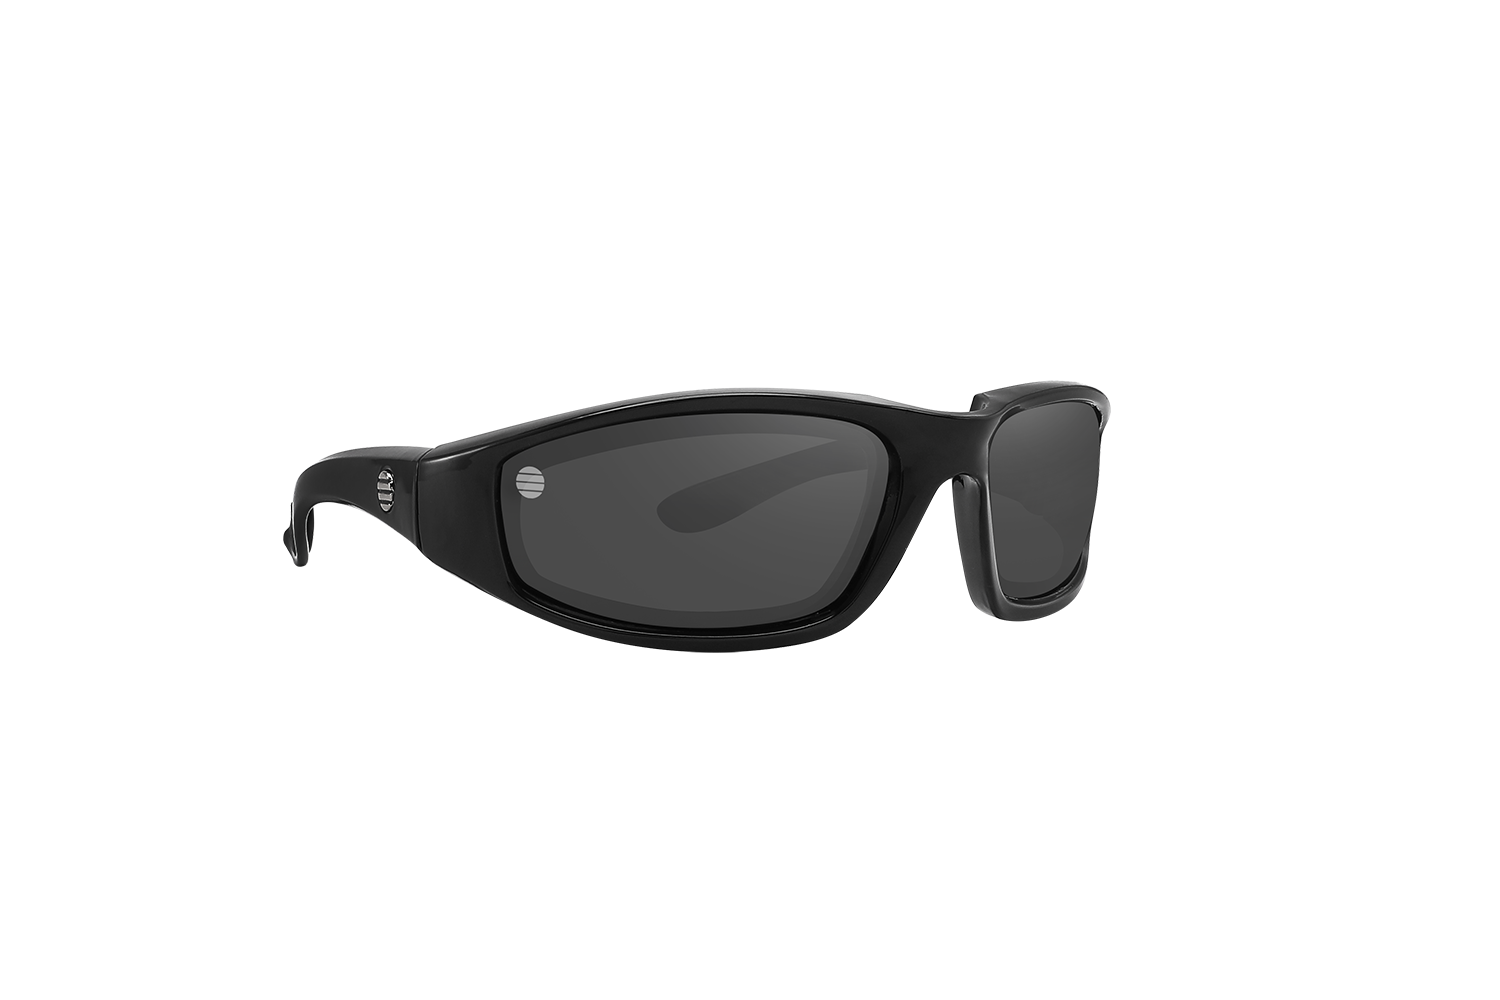 Men's Goggles (Less than $10 in the store)